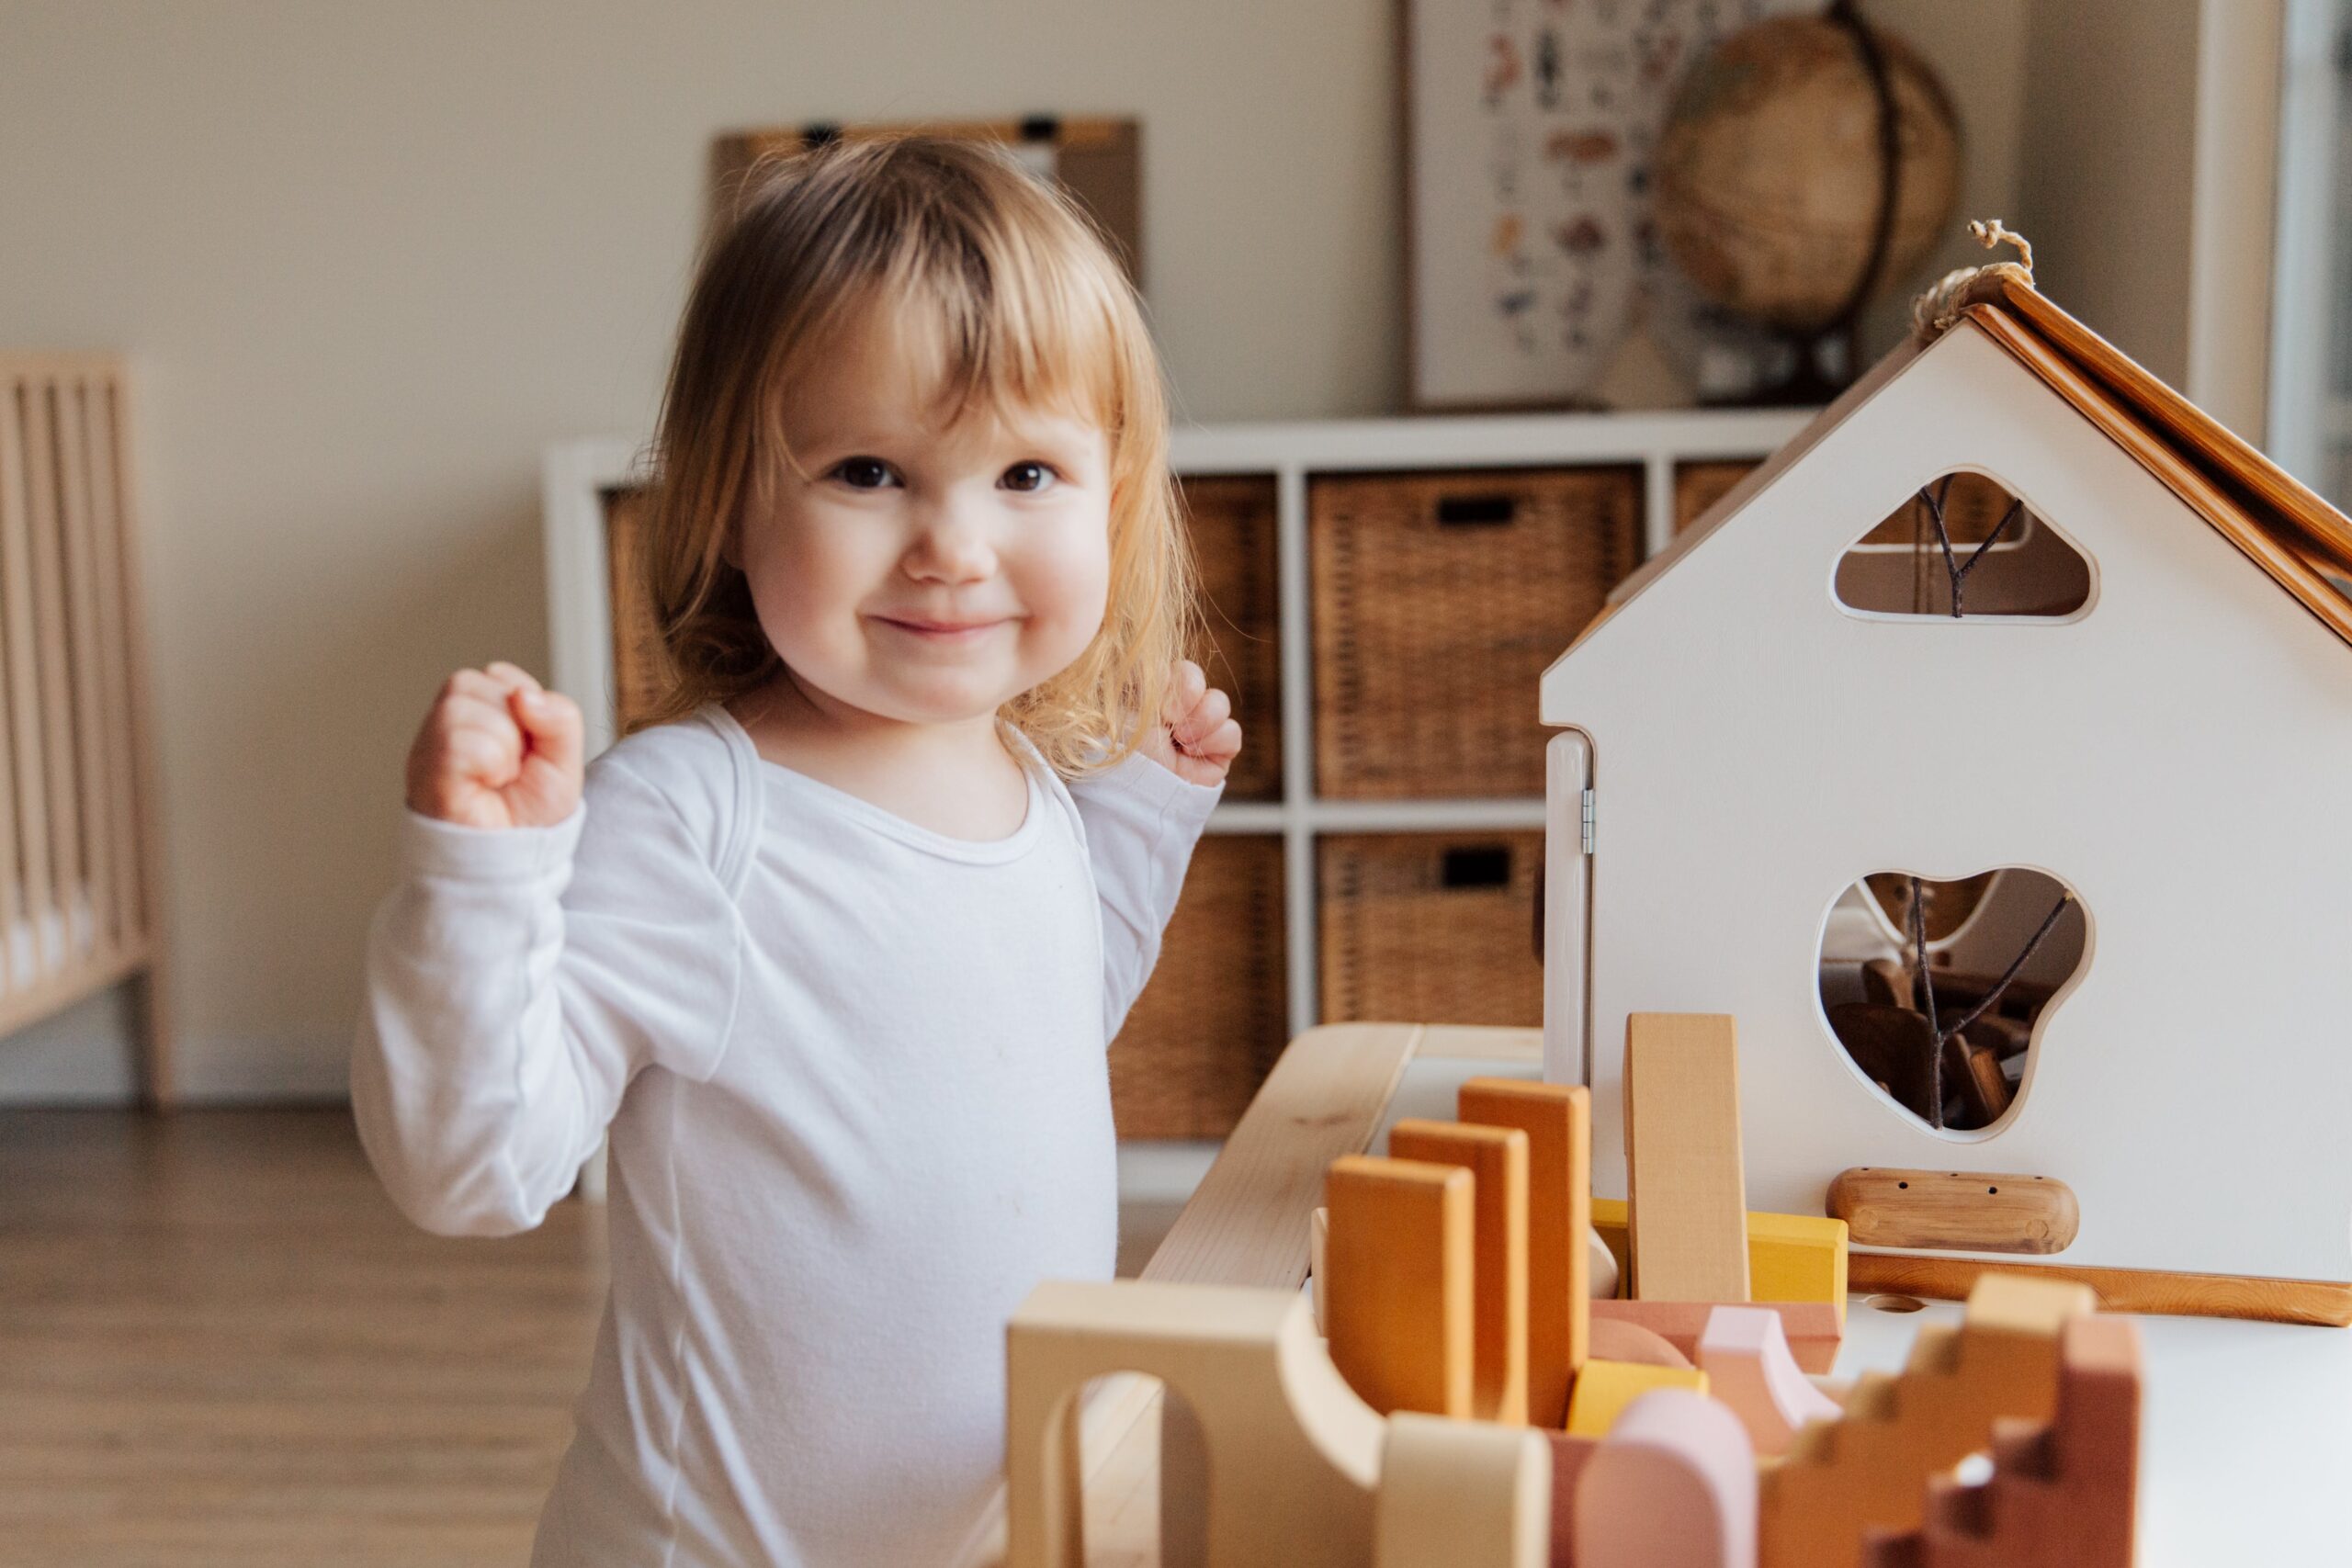 Happy little girl engaged in play with educational toys, exemplifying the experienced and trustworthy childcare provided by Lifetime of Love Nannies' On Call Babysitters